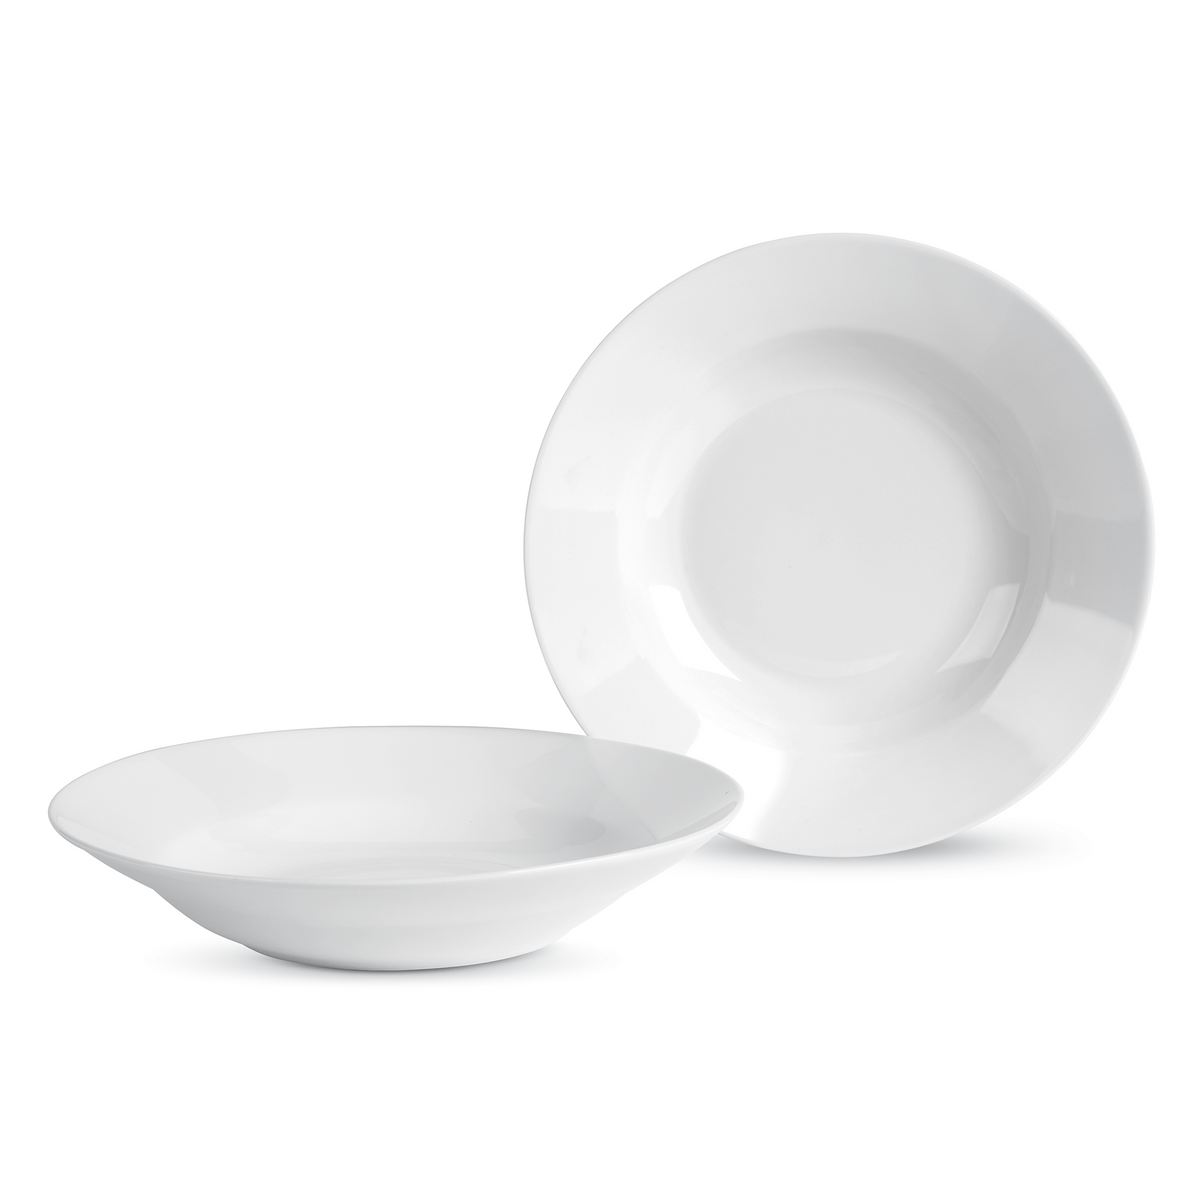 Pair of soup bowls, one side-on, the other top-down